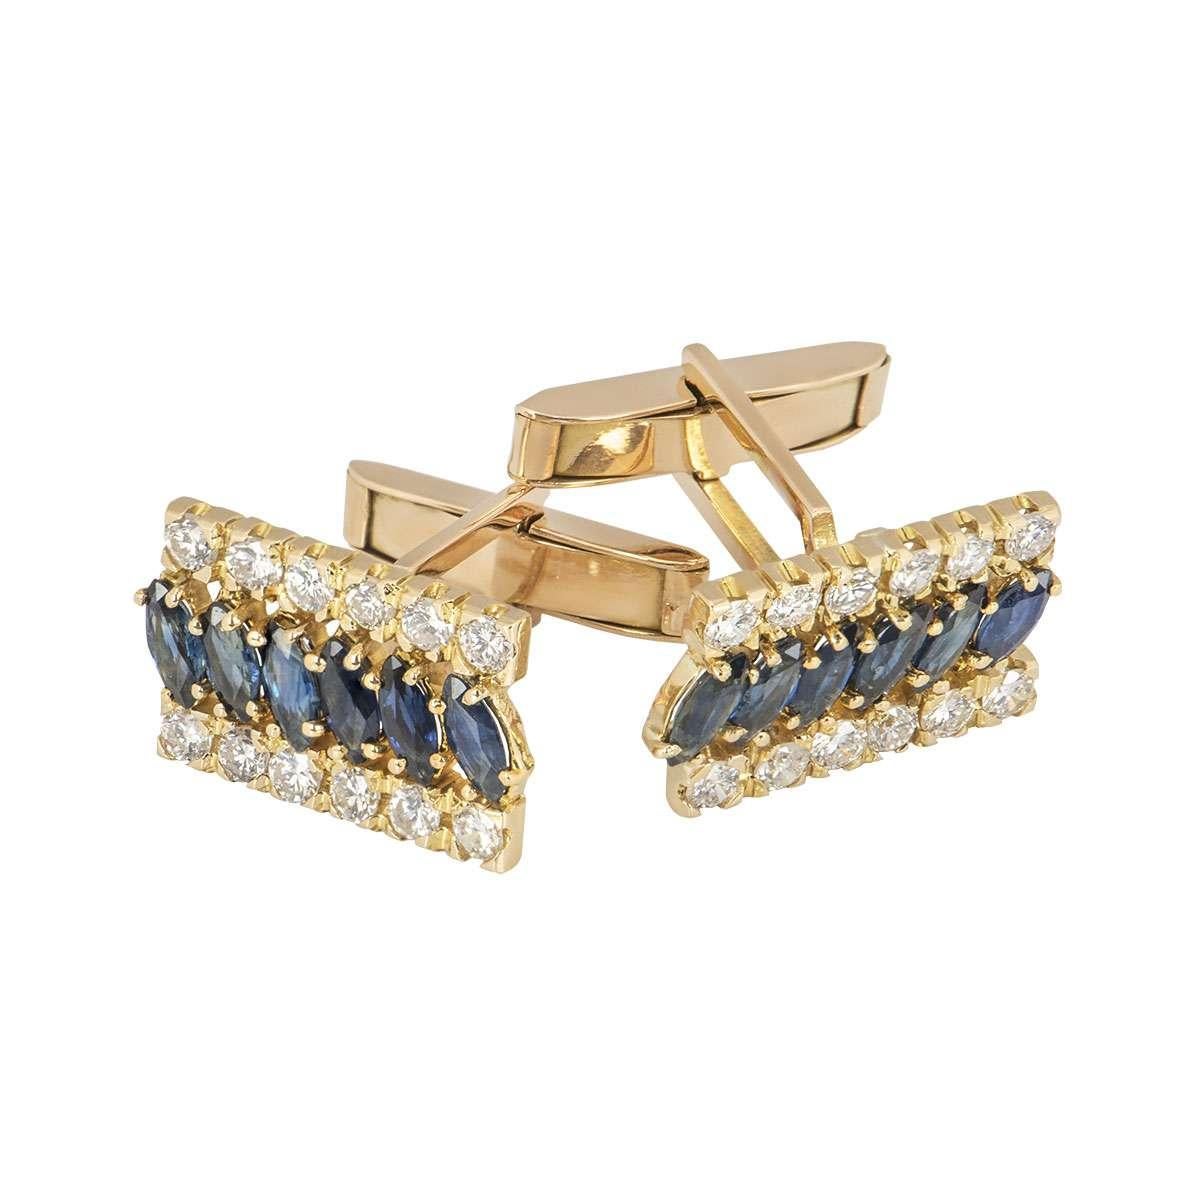 A pair of 18k yellow gold diamond and sapphire cufflinks. The cufflinks are set with a row of round brilliant cut diamonds on top and bottom with a row of marquise shaped sapphires set in between. The 24 diamonds have an approximate gross weight of